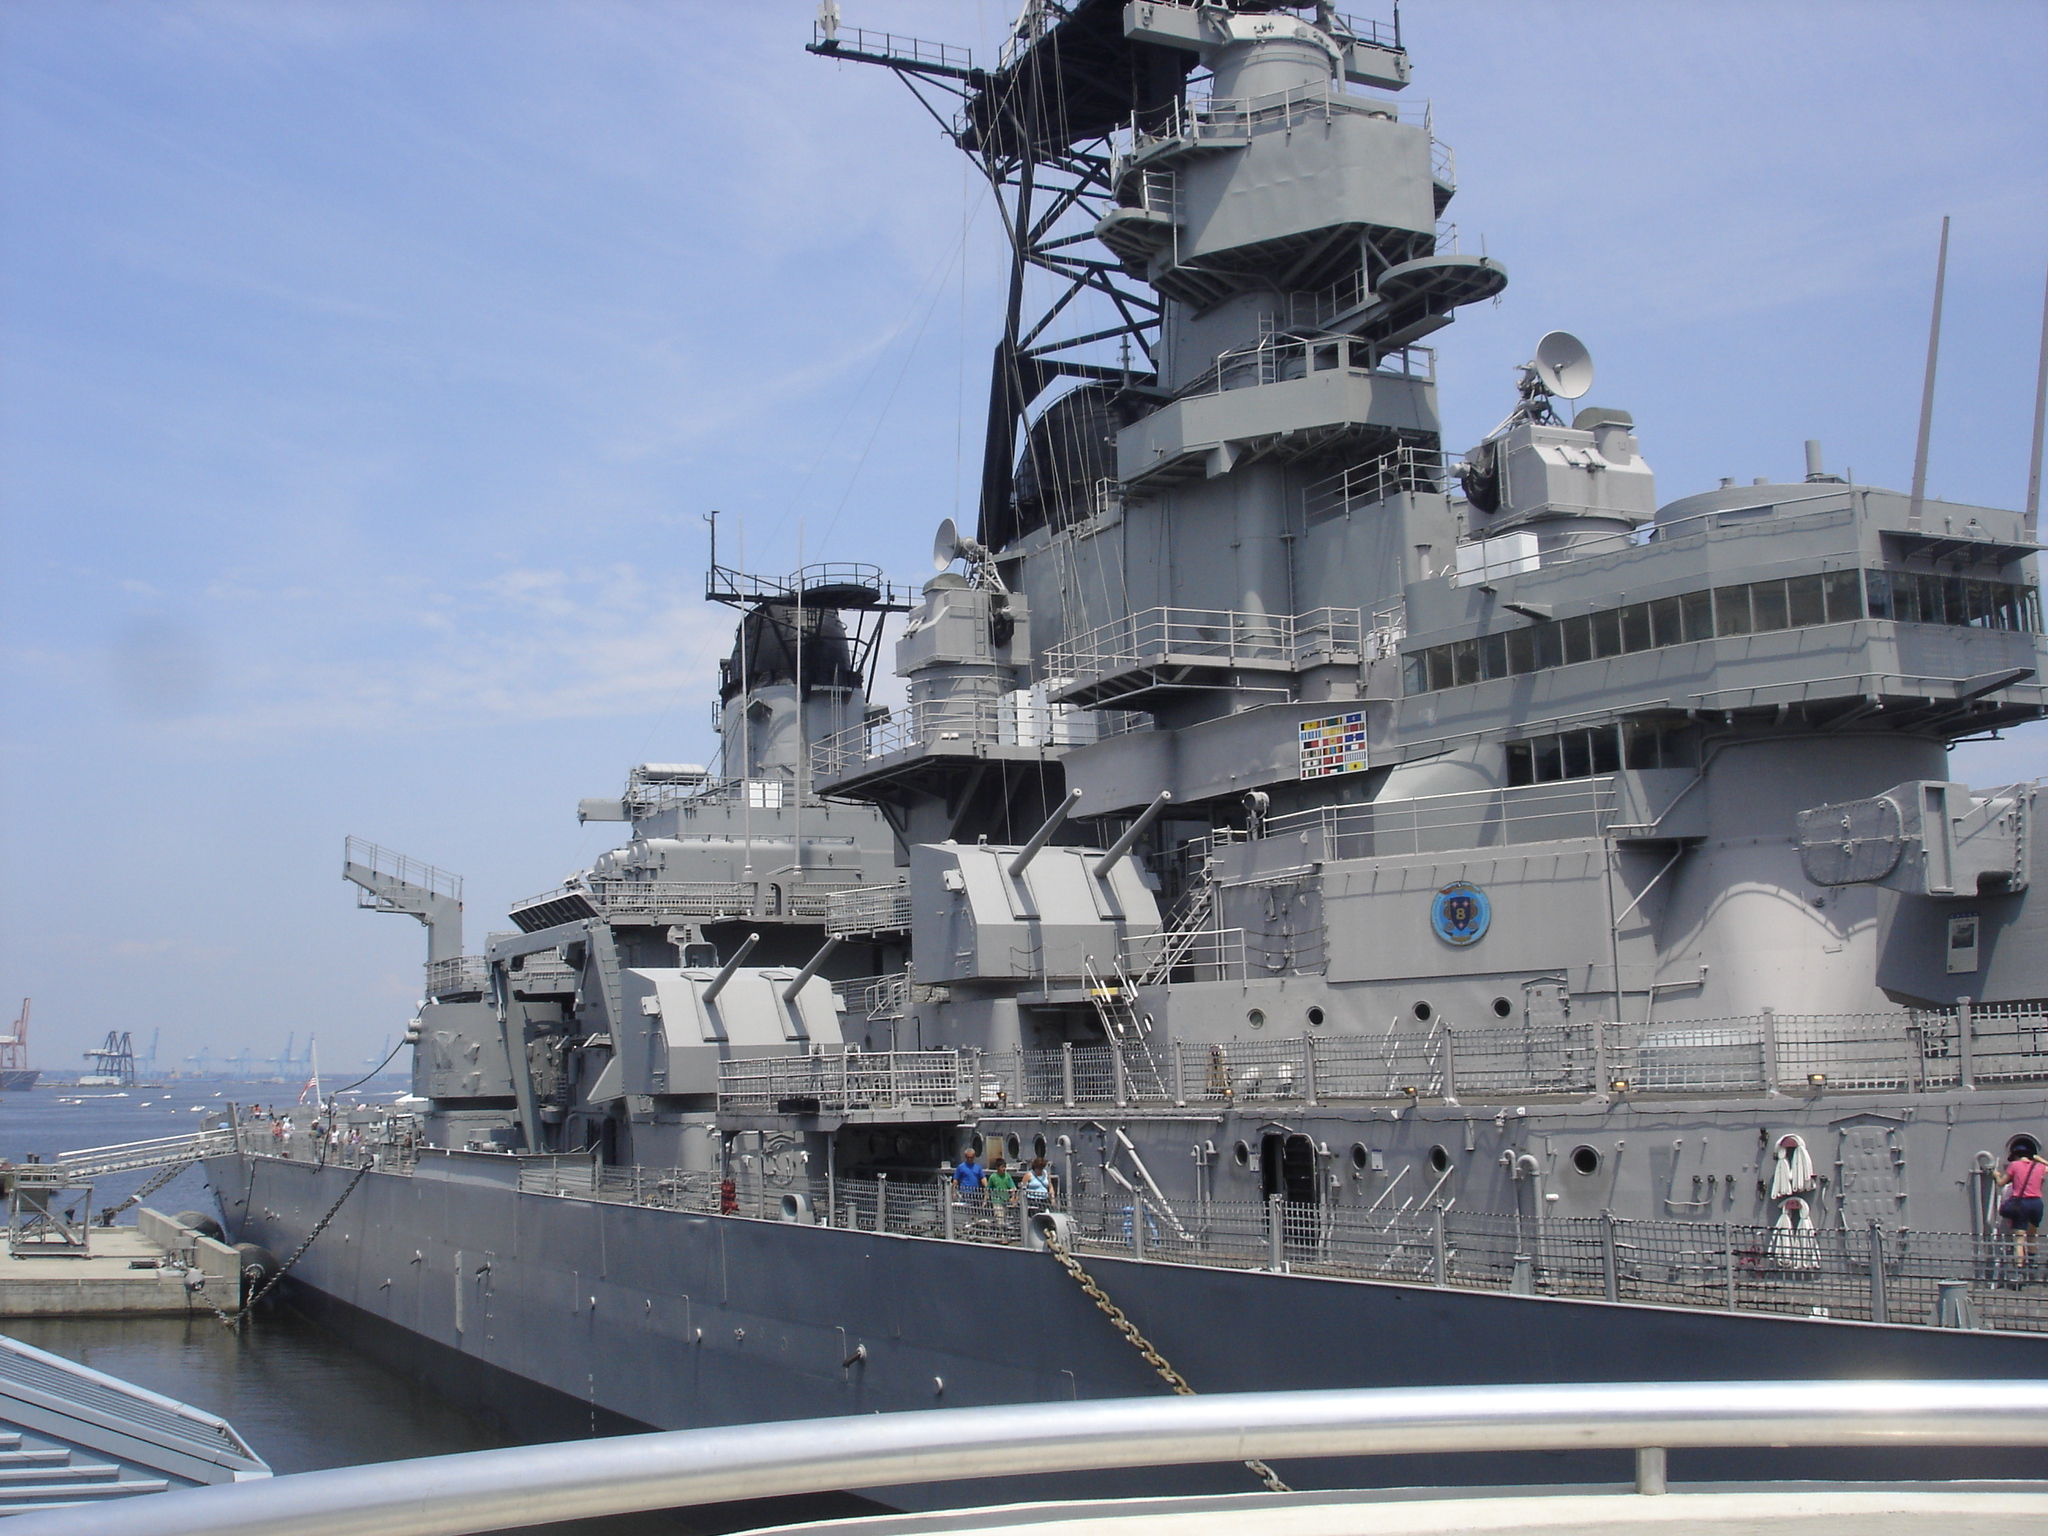 a battleship docked with people on the dock